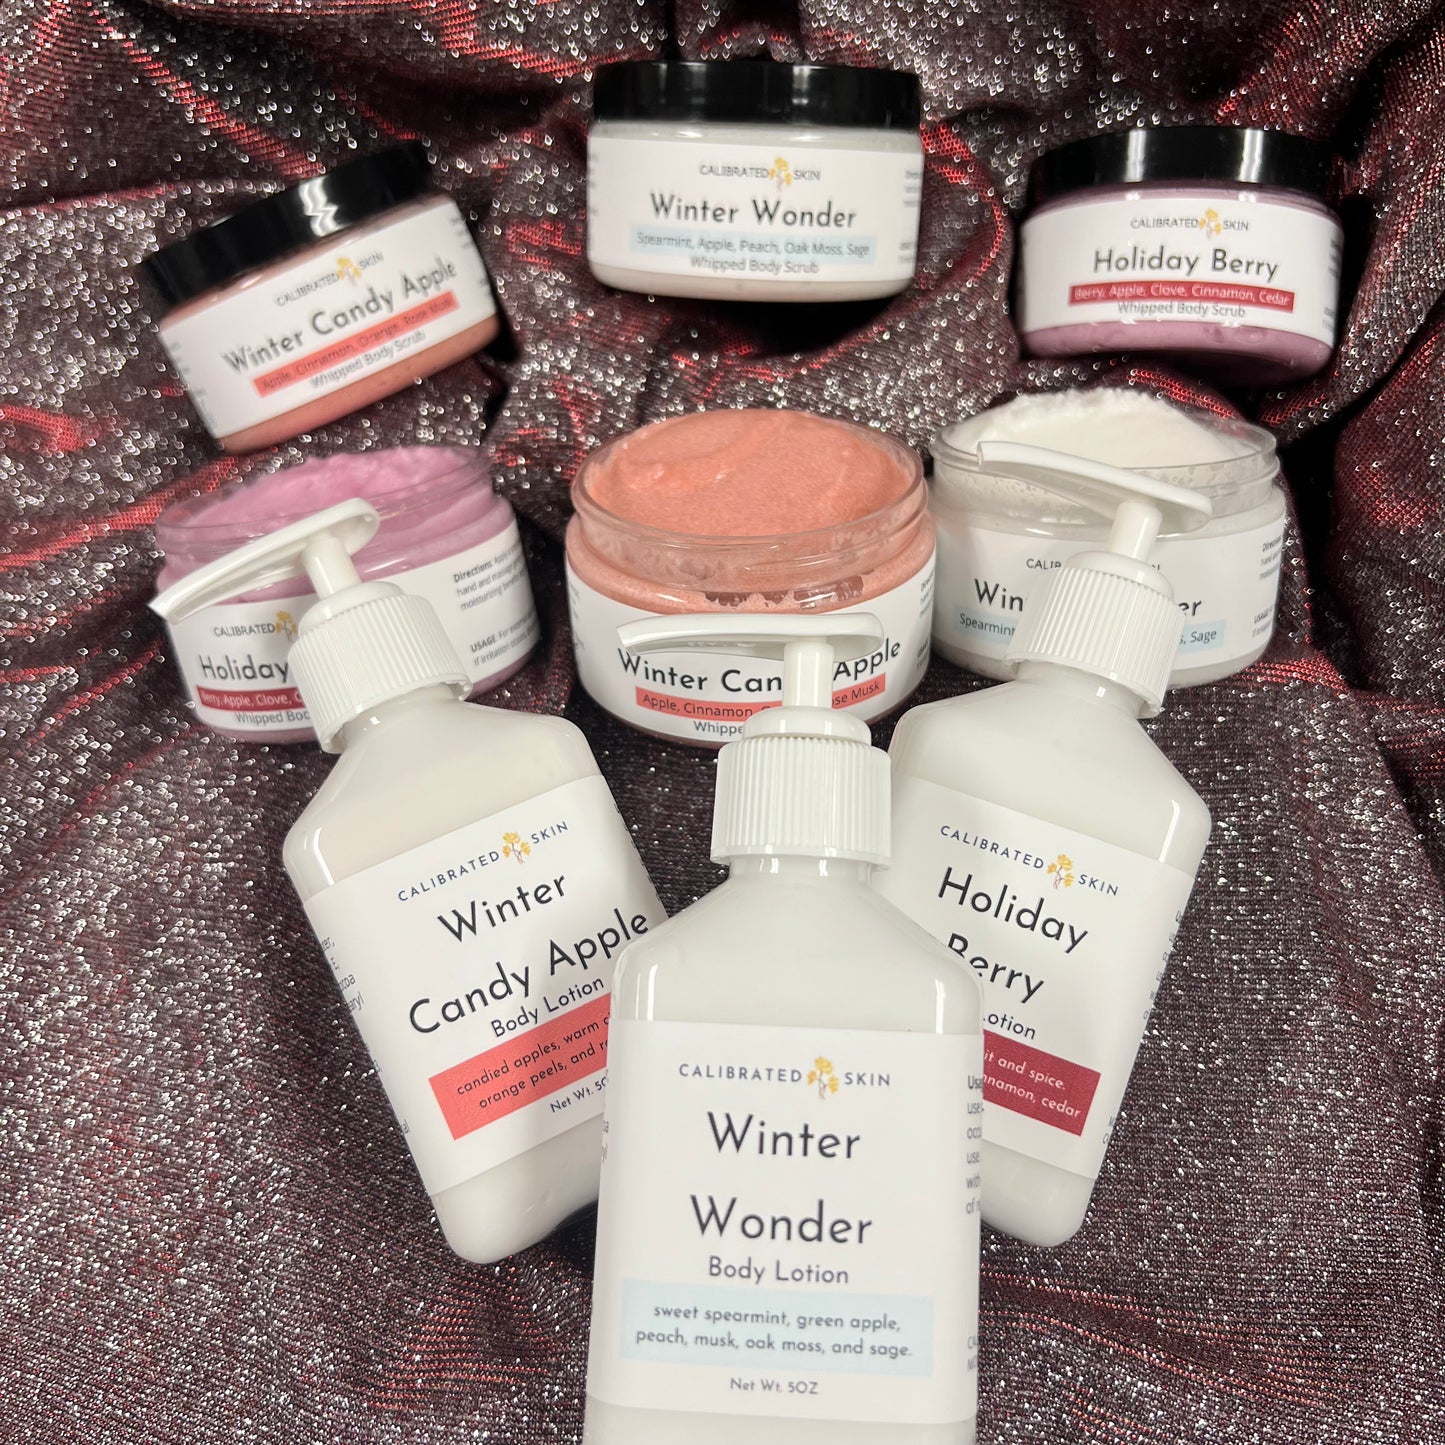 Holiday Berry Whipped Body Scrub